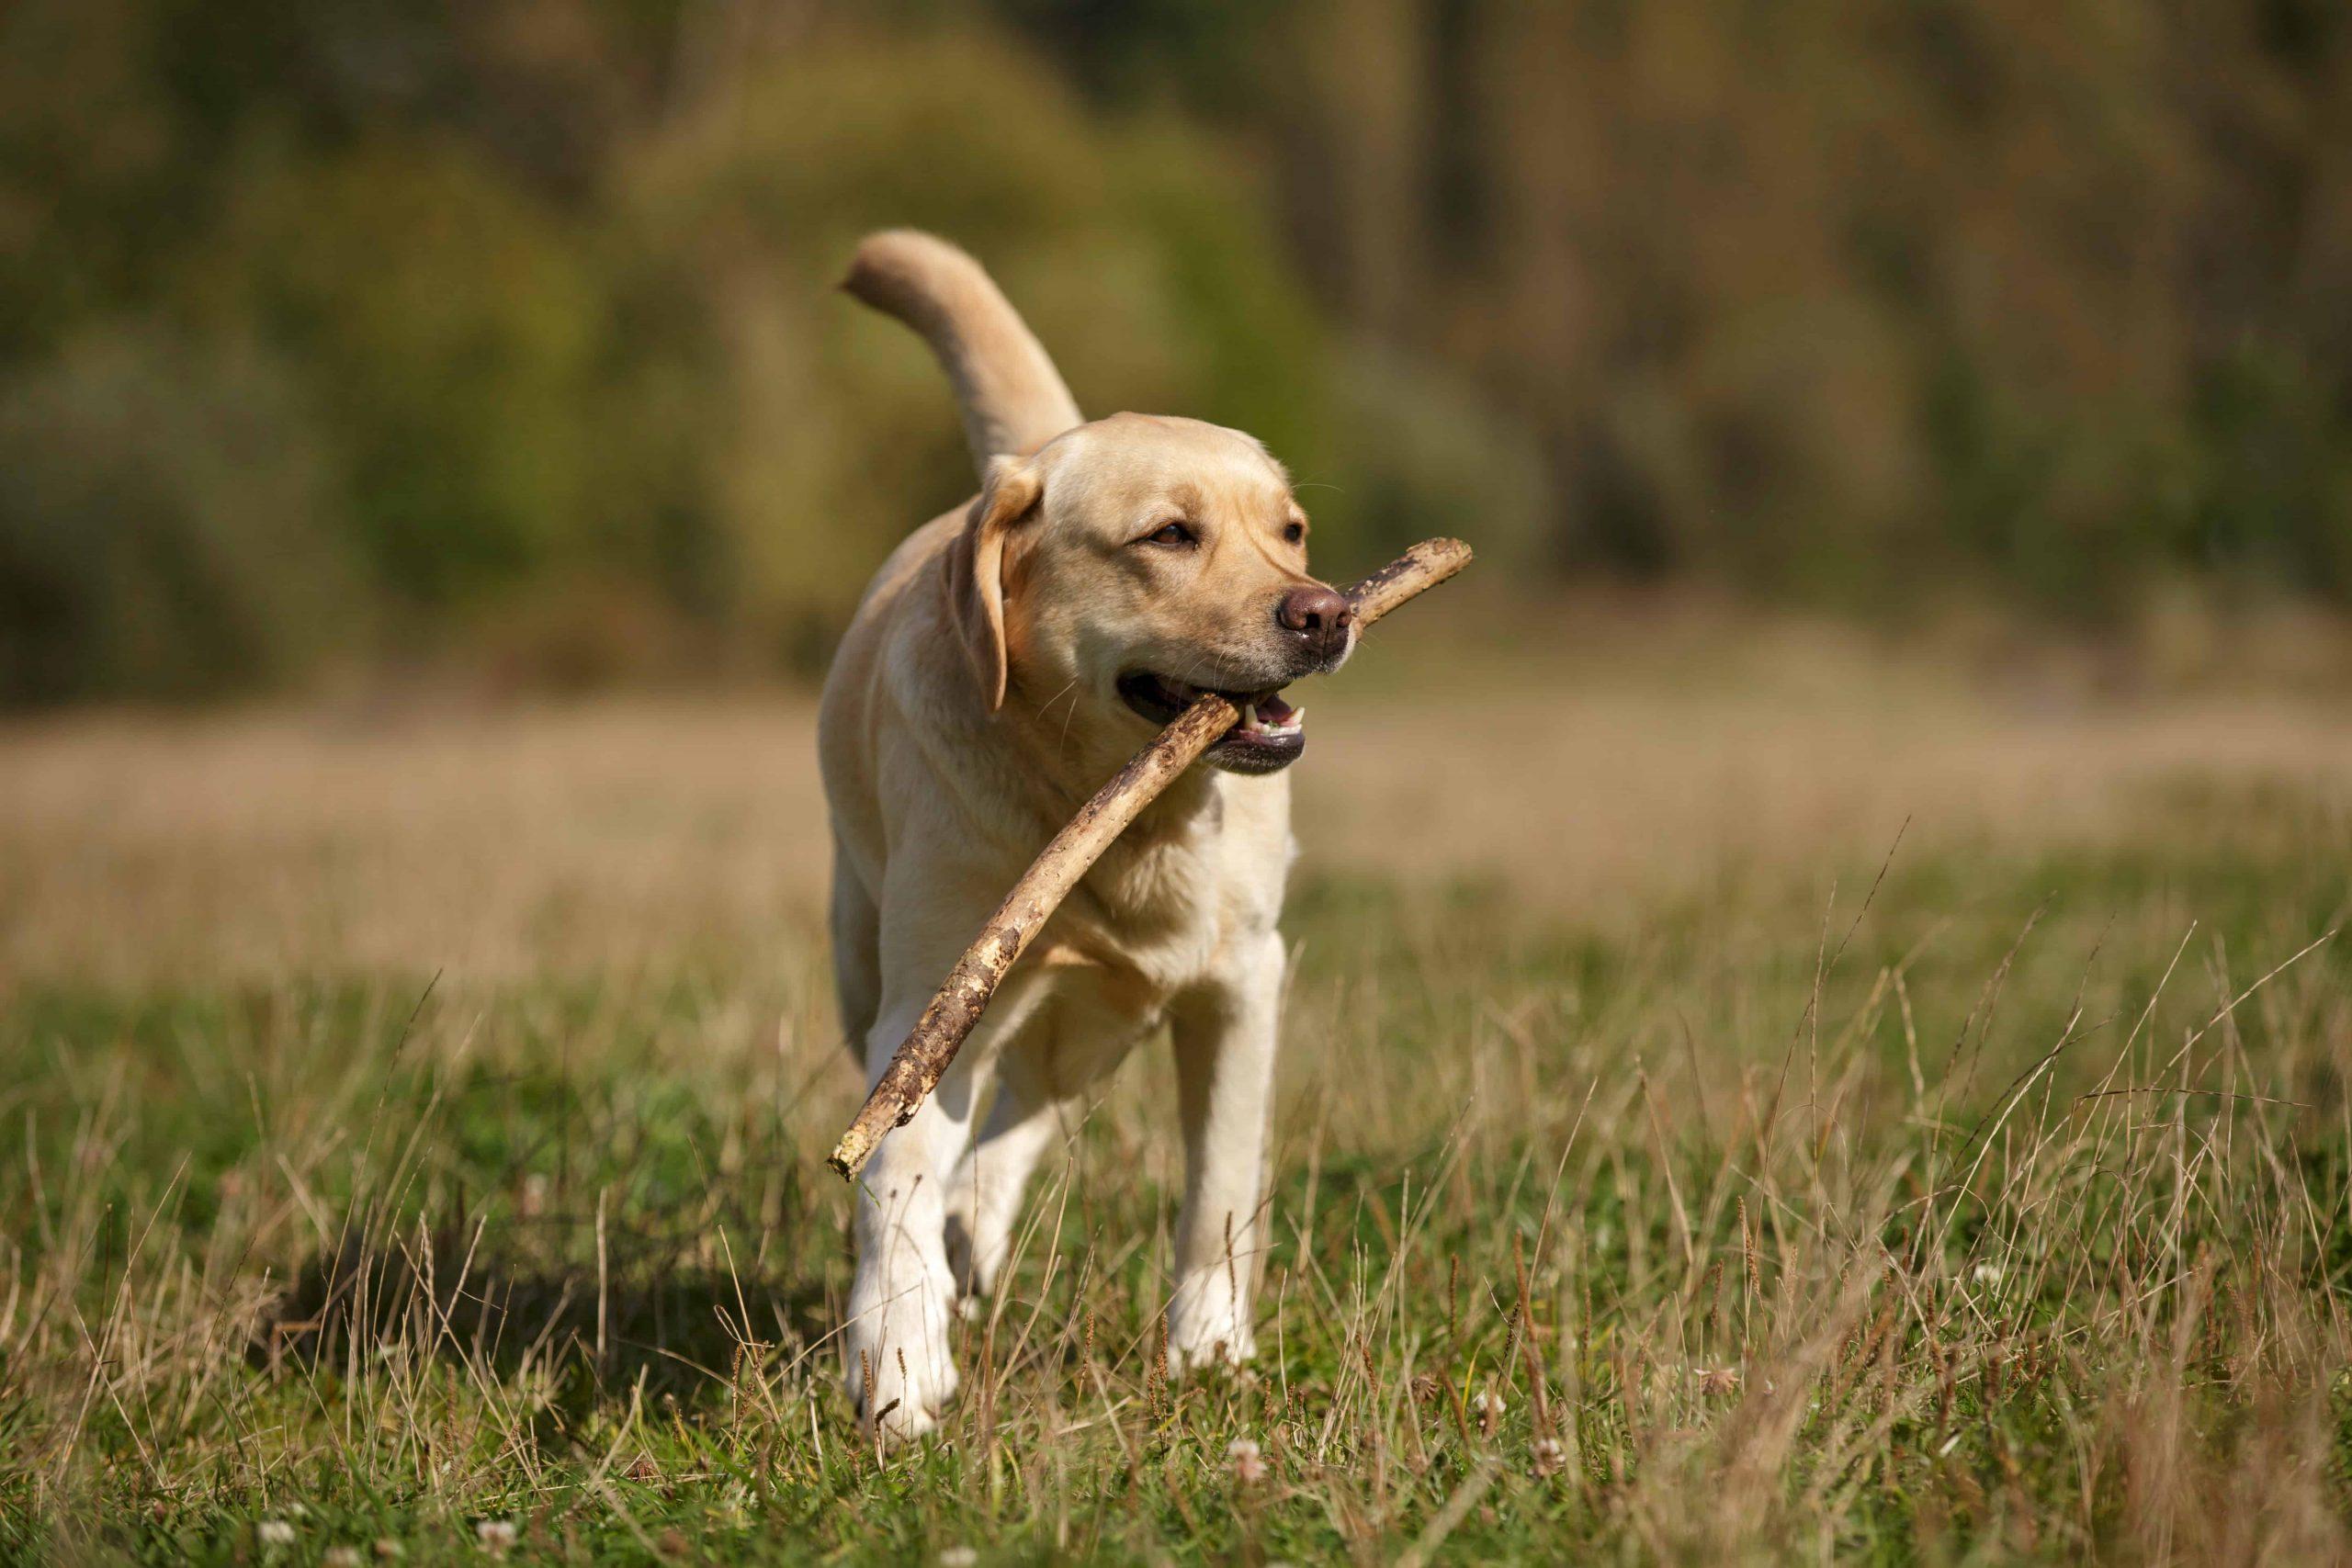 Labrador diseases and symptoms - dog catching wood